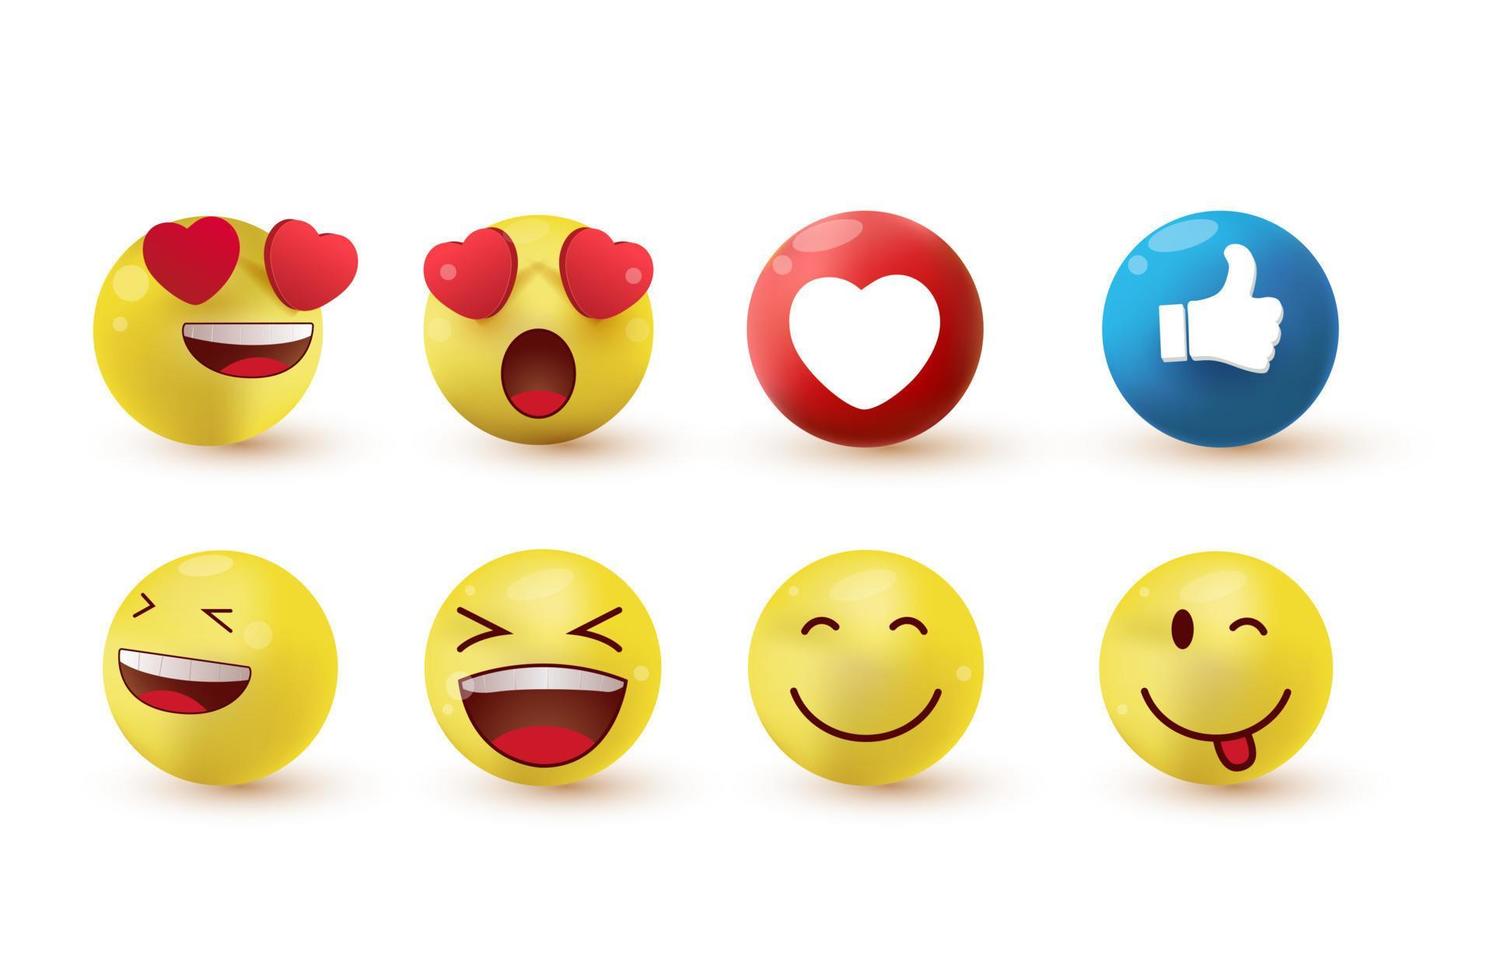 Emoji and emoticon faces vector set. Emoji or emoticons with  surprise, funny, laughing, and scary expressions for design elements for social media